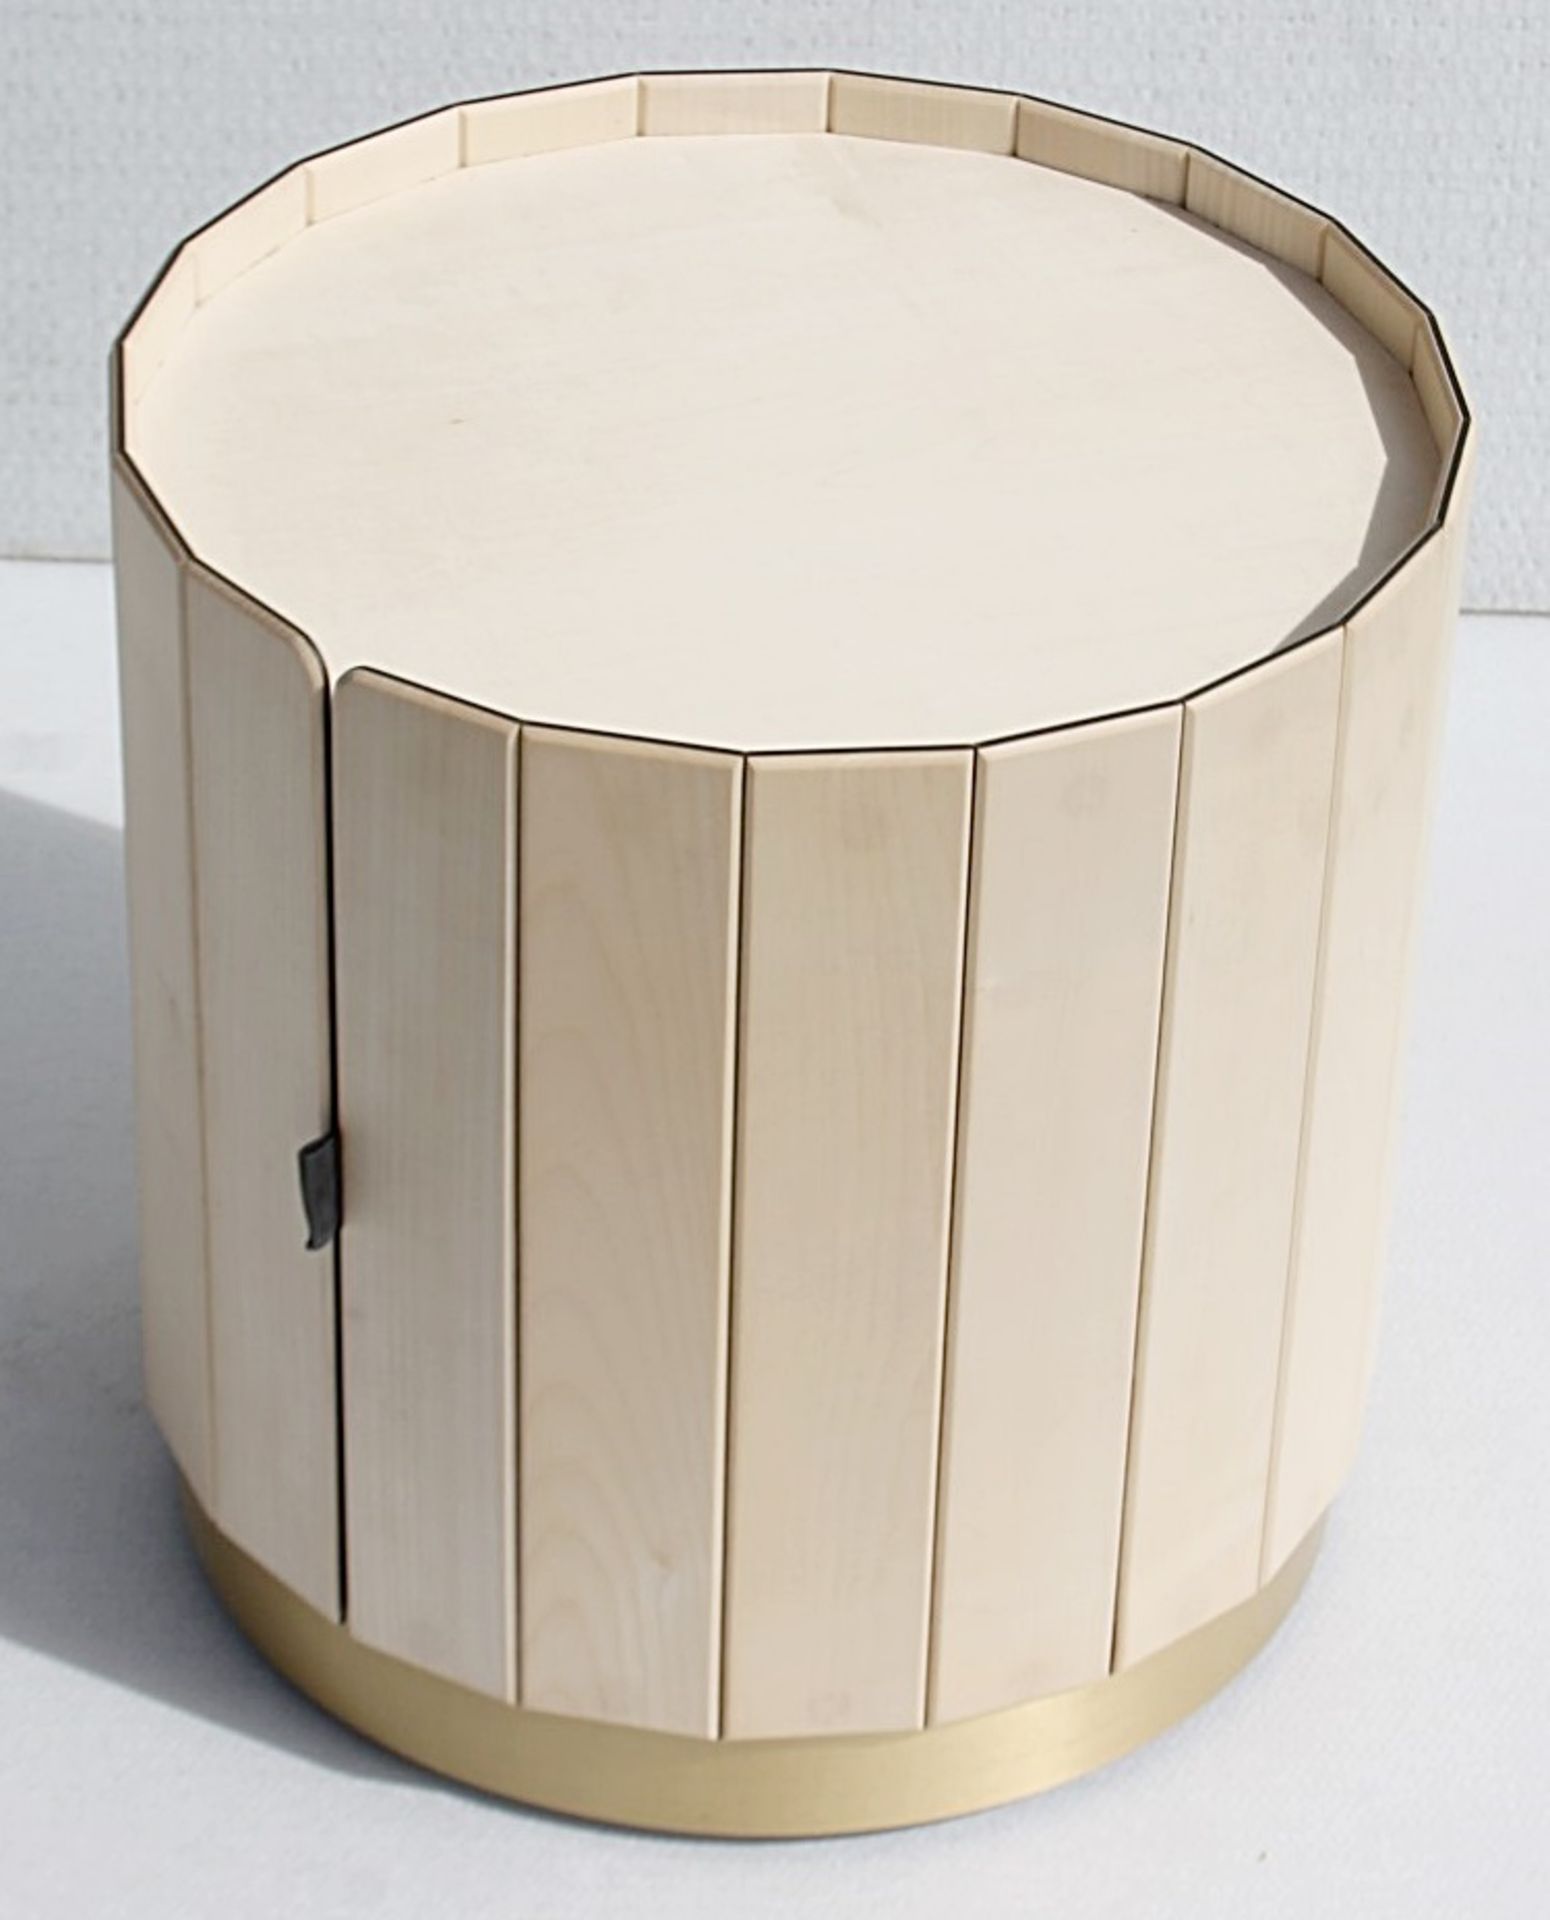 1 x BAXTER 'Ninfea' Italian Designer Solid Maple Bedside Table With Storage - Original Price £2,399 - Image 4 of 7